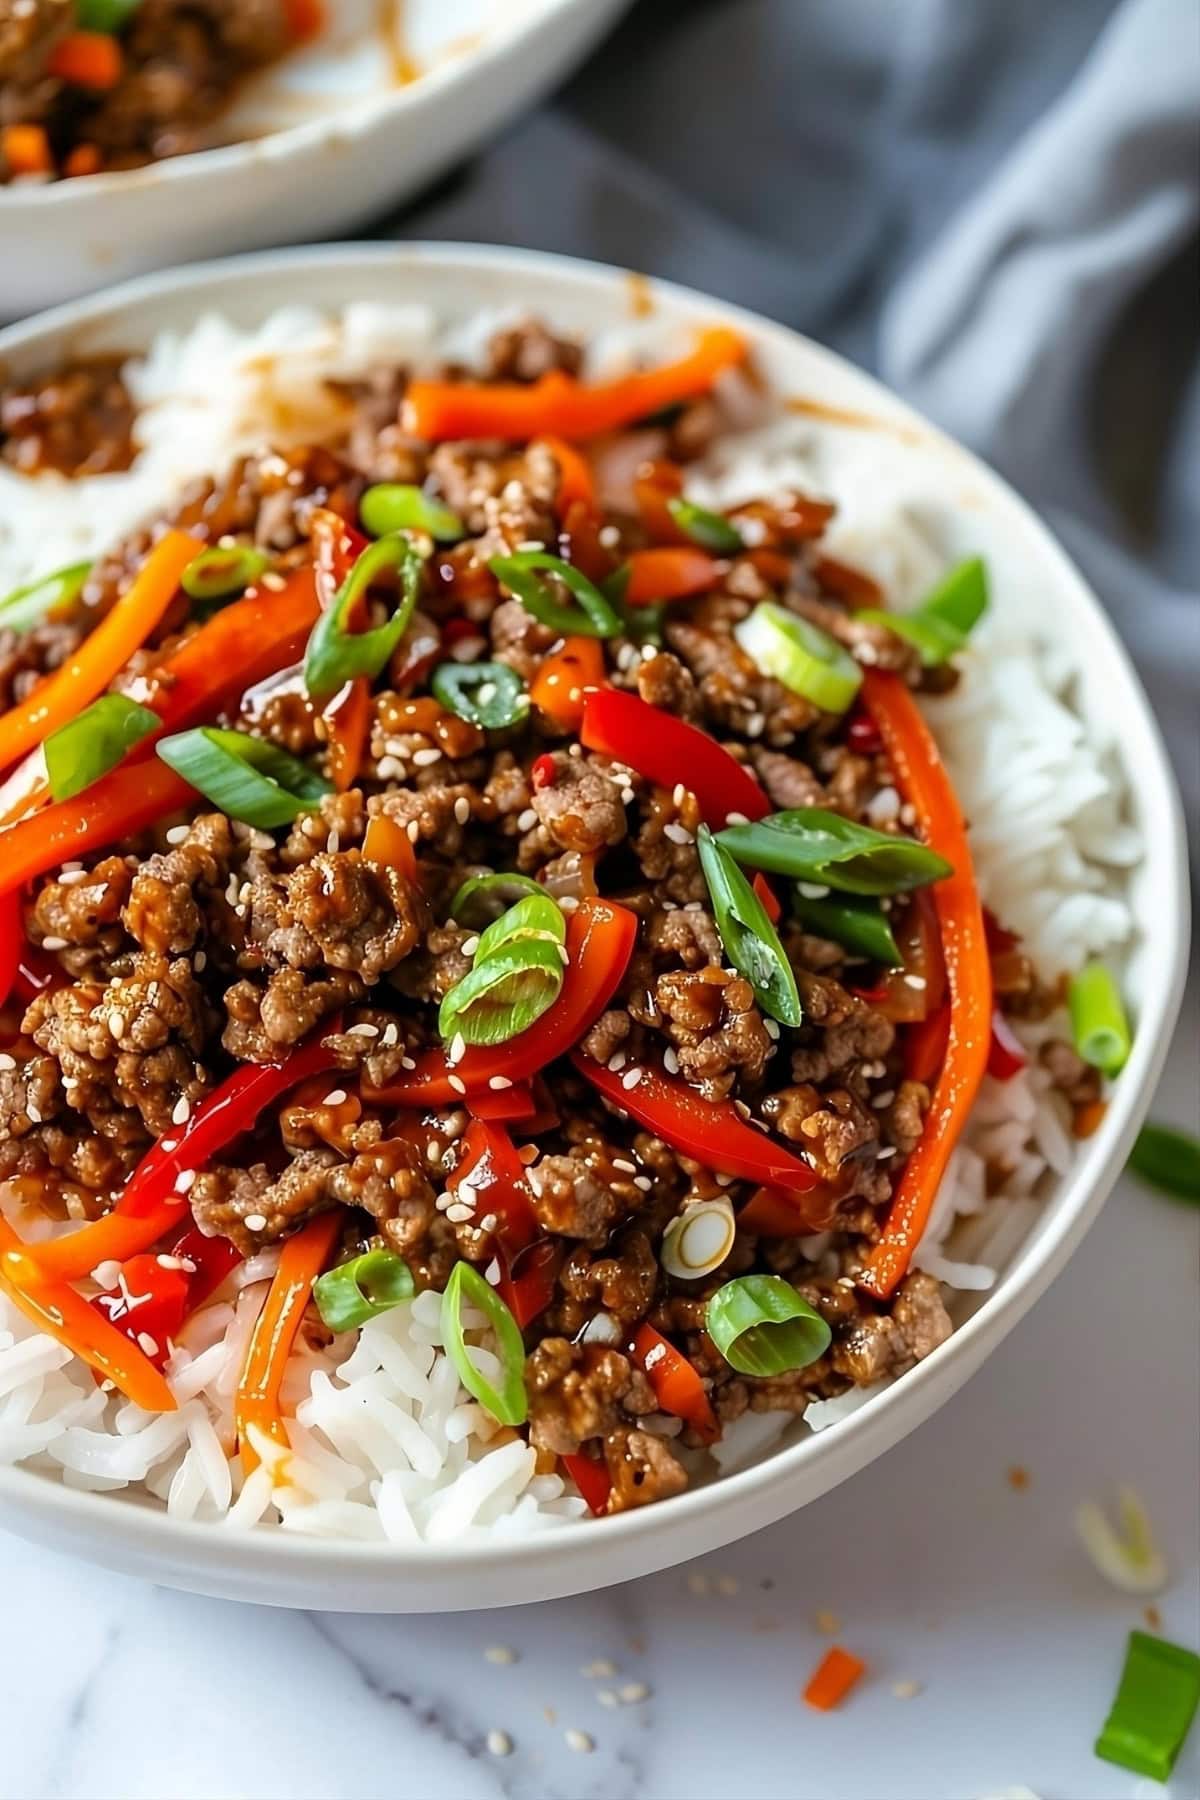 Korean beef bowl with ground beef, savory sauce, thinly sliced bell pepper and carrots served in a white bowl.